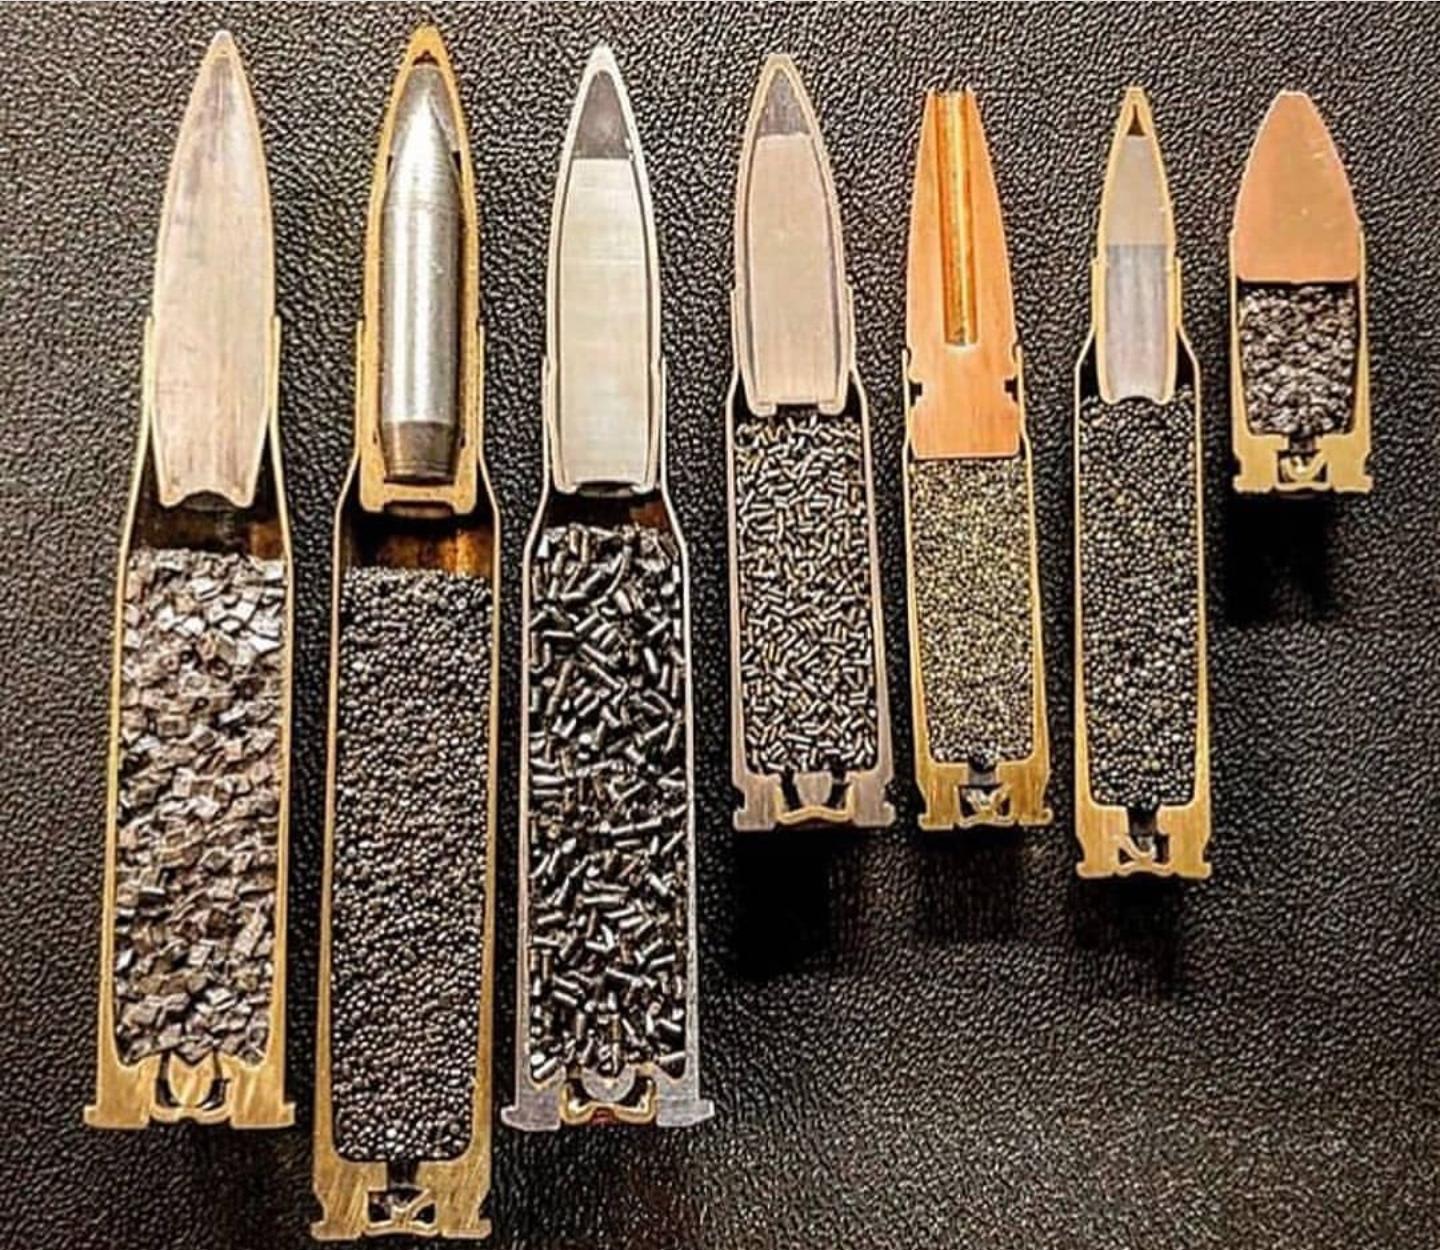 Different calibered bullets cut in half.